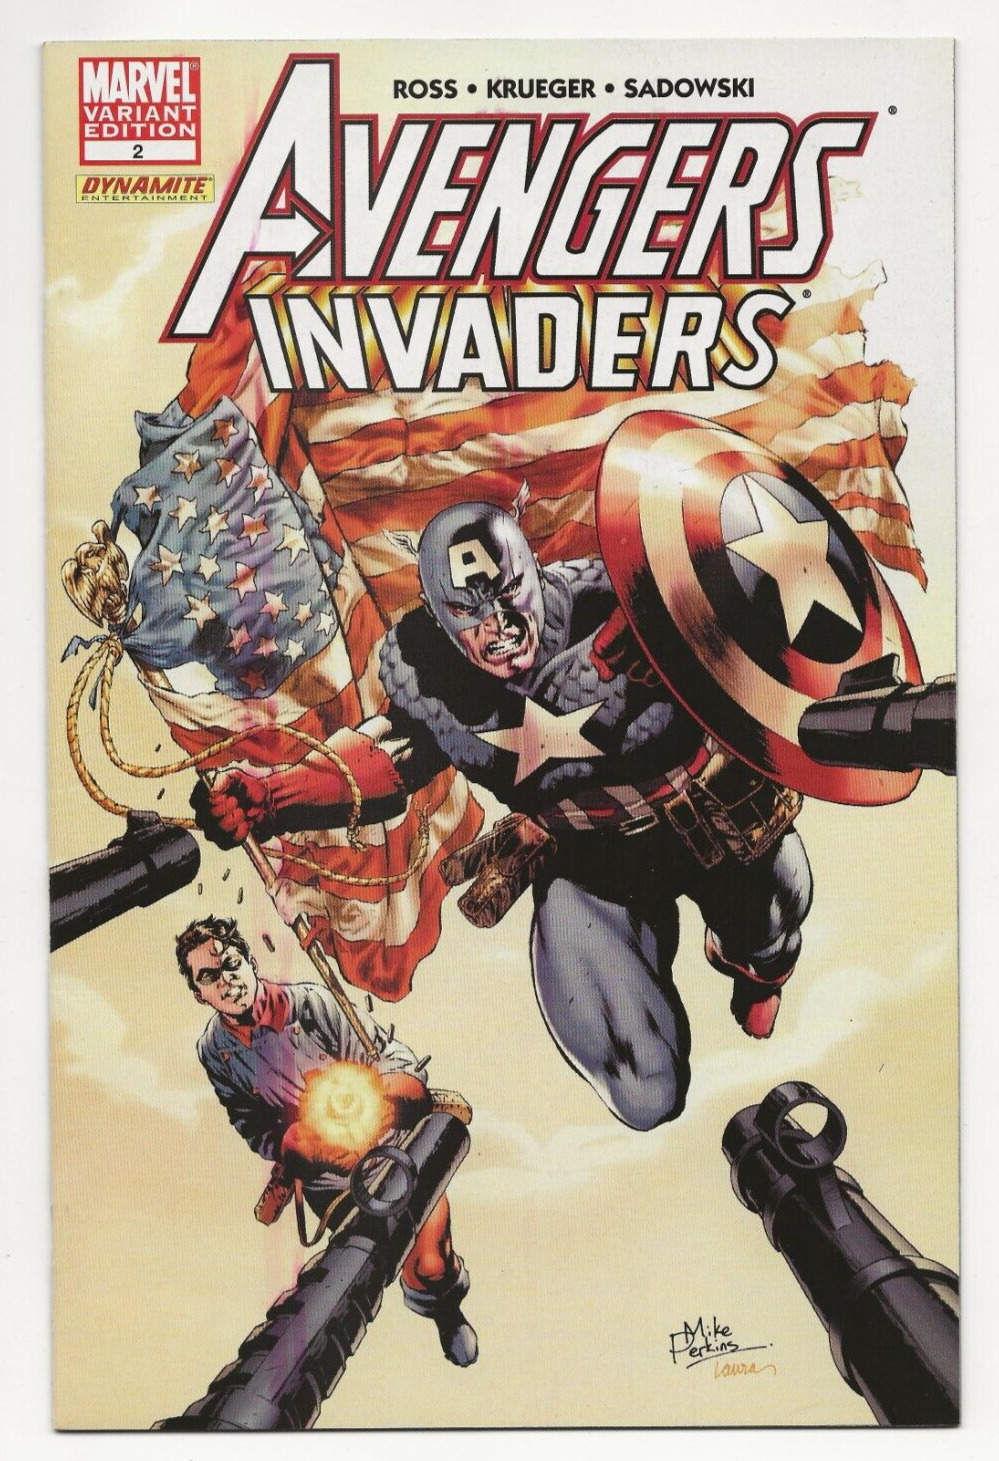 Marvel Comics Dynamite AVENGERS INVADERS #2 first print Perkins cover B variant